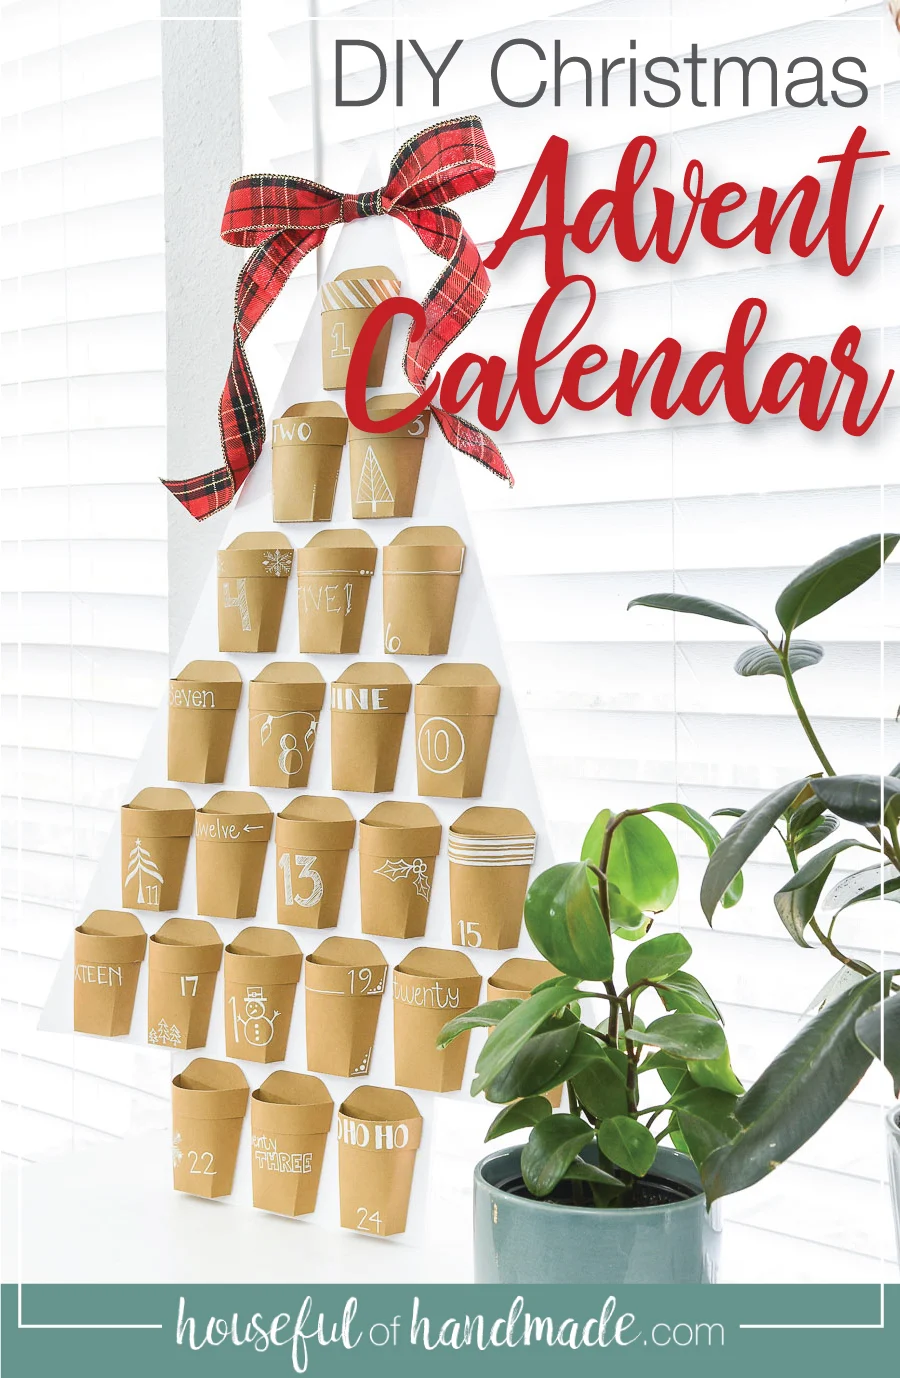 Picture of the finished DIY advent calendar with text overlay: DIY Christmas Advent Calendar. 